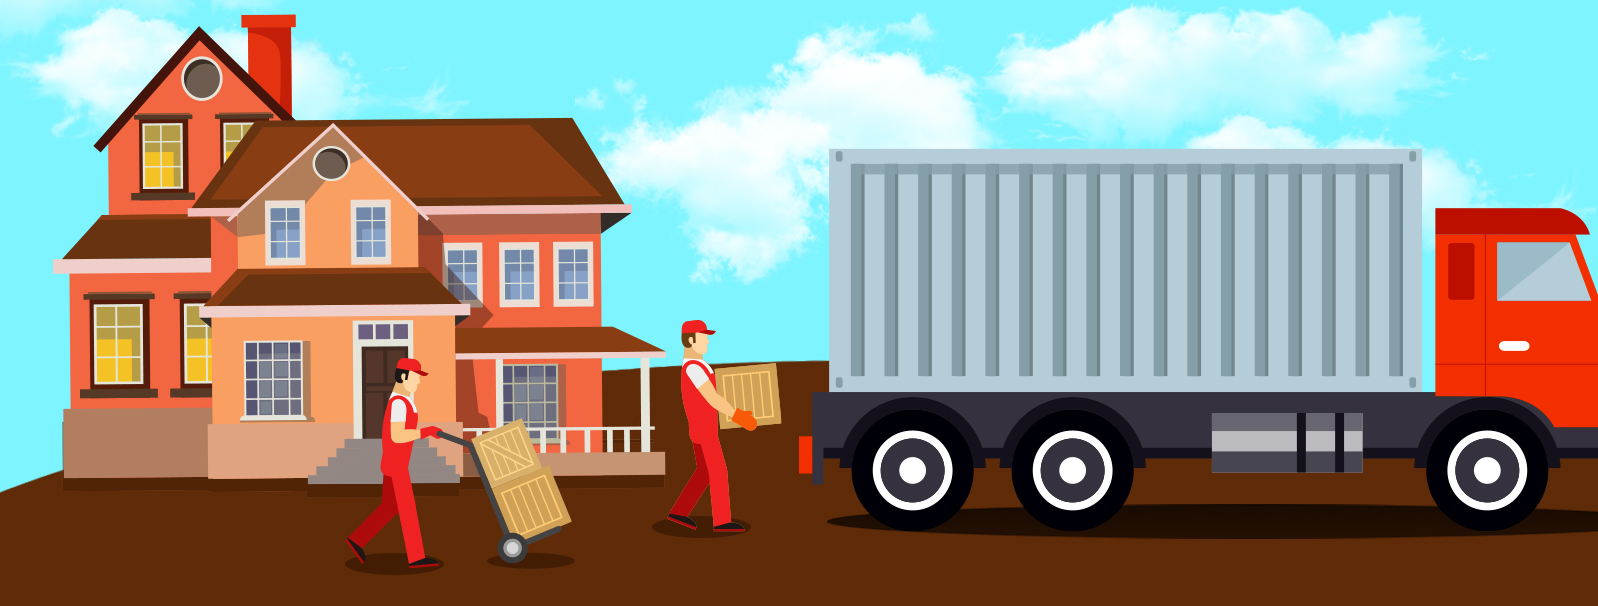 Best Packers and Movers in Gurgaon, Hariom Packers and Movers